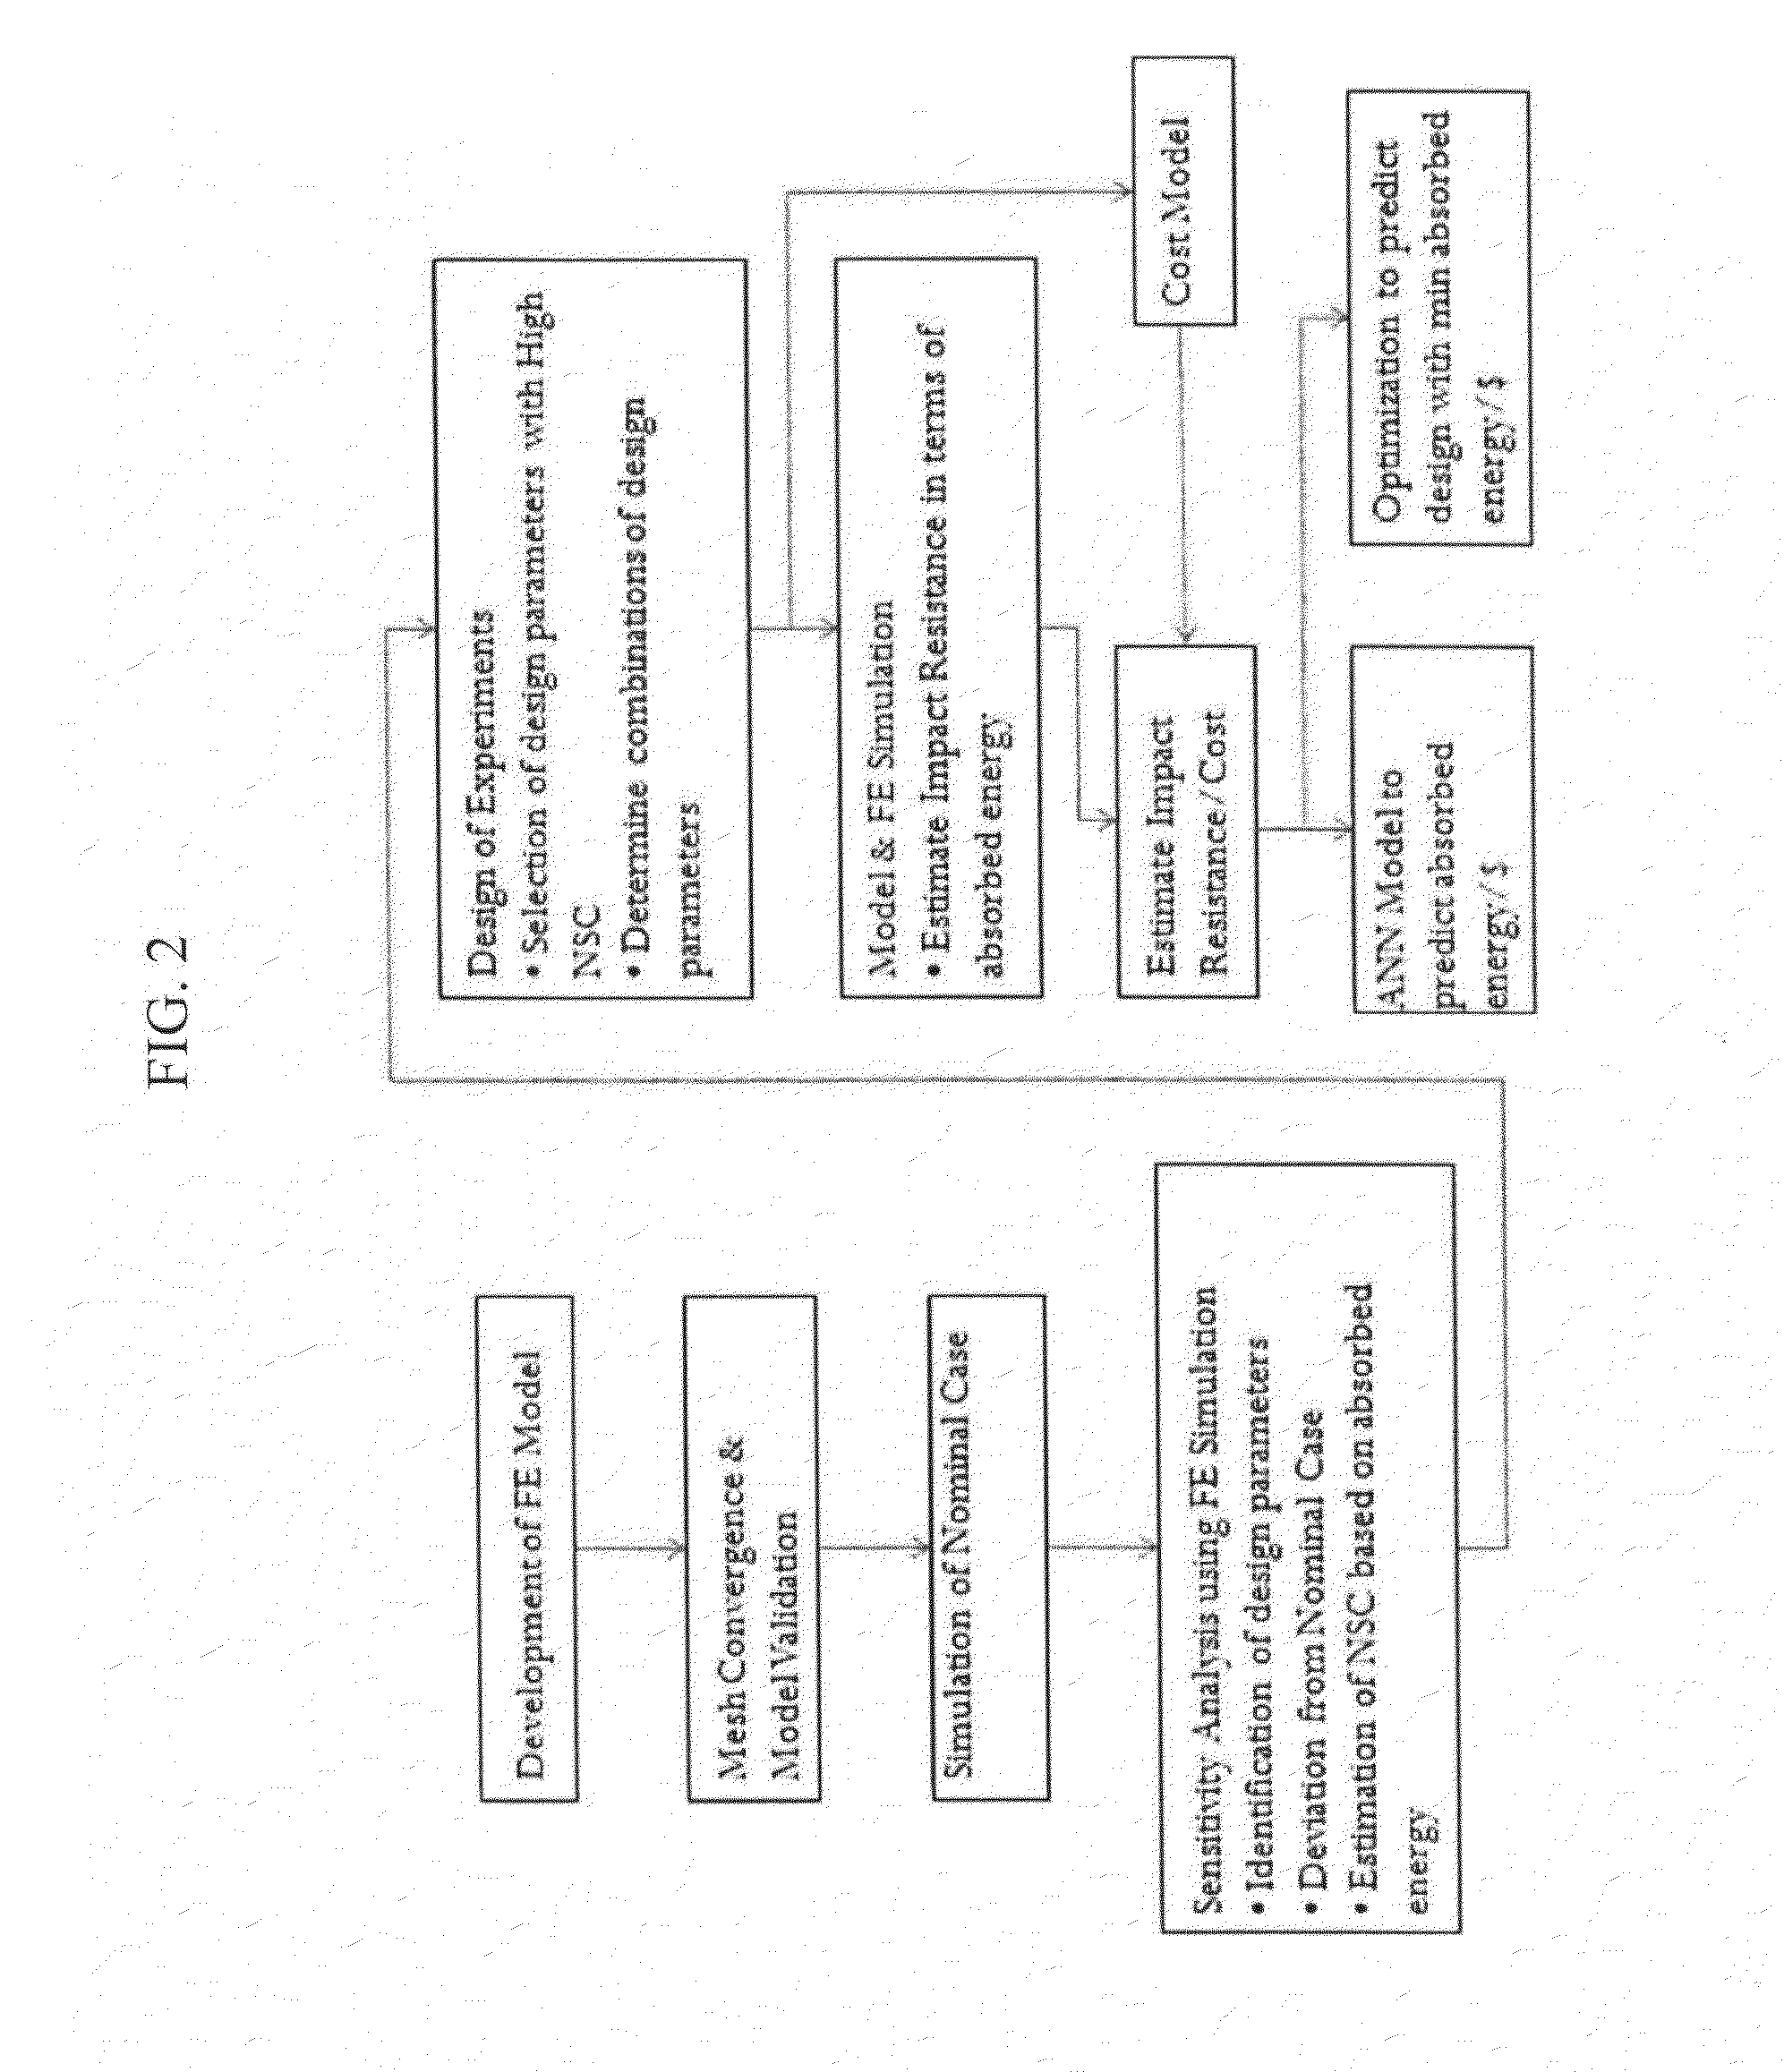 Method and apparatus for characterizing composite materials using an artificial neural network